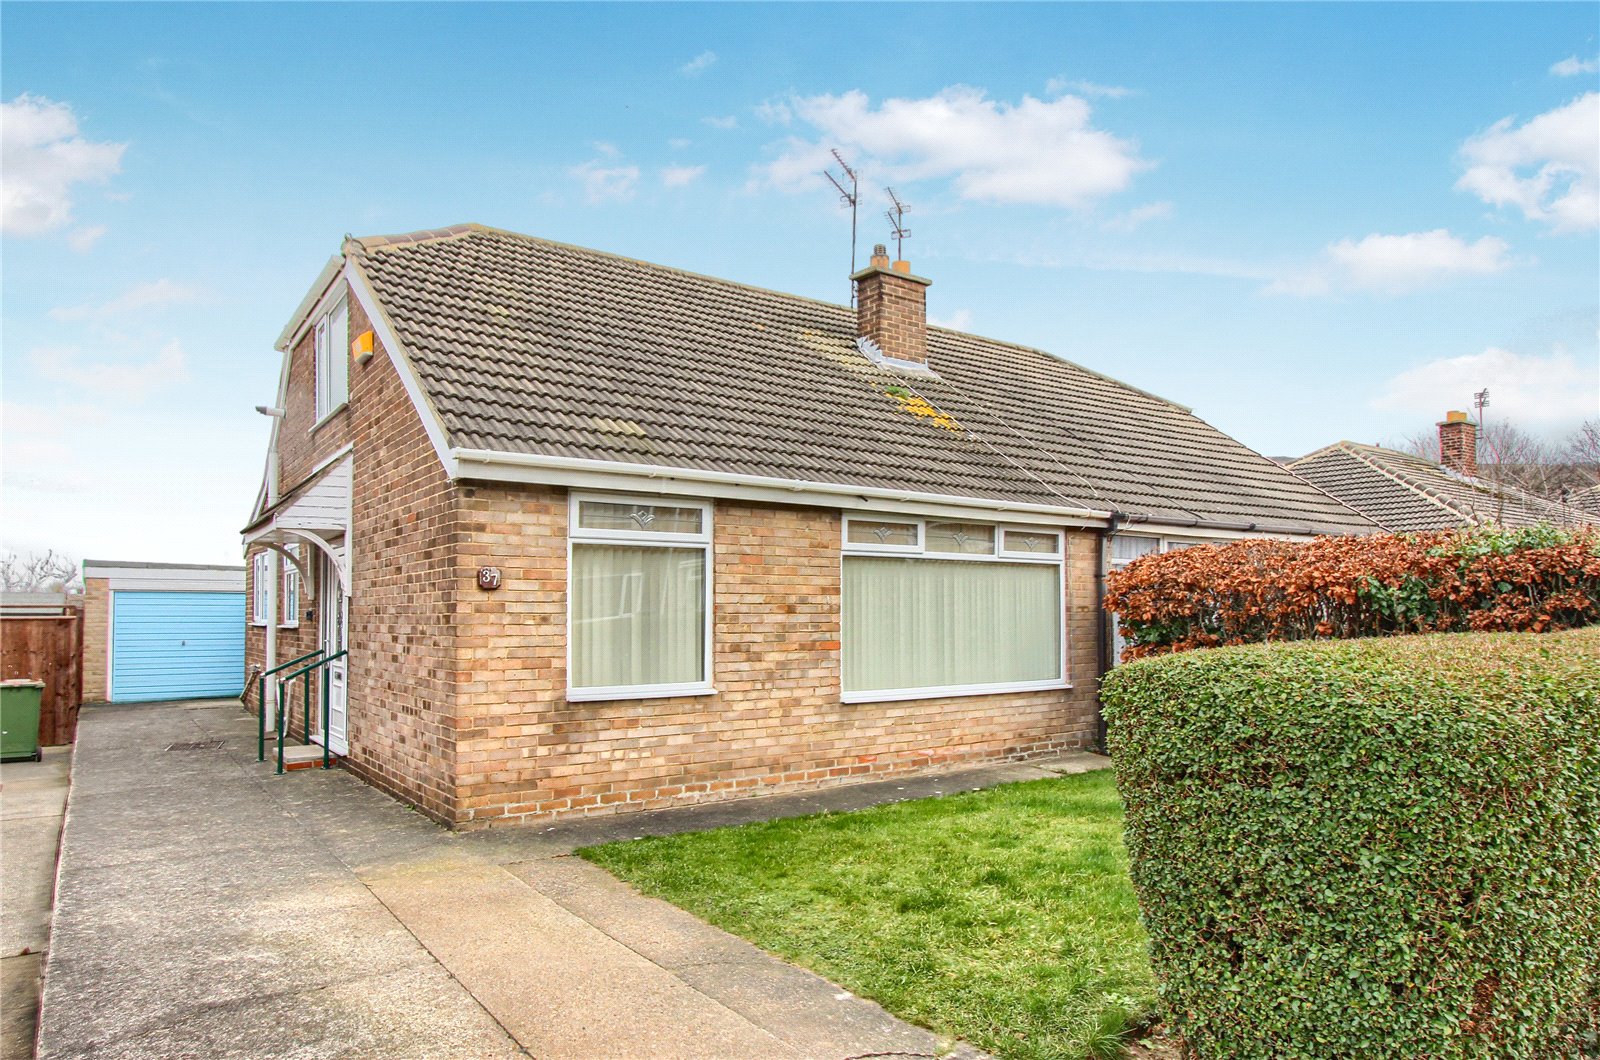 3 bed bungalow for sale in Ripon Way, Eston - Property Image 1